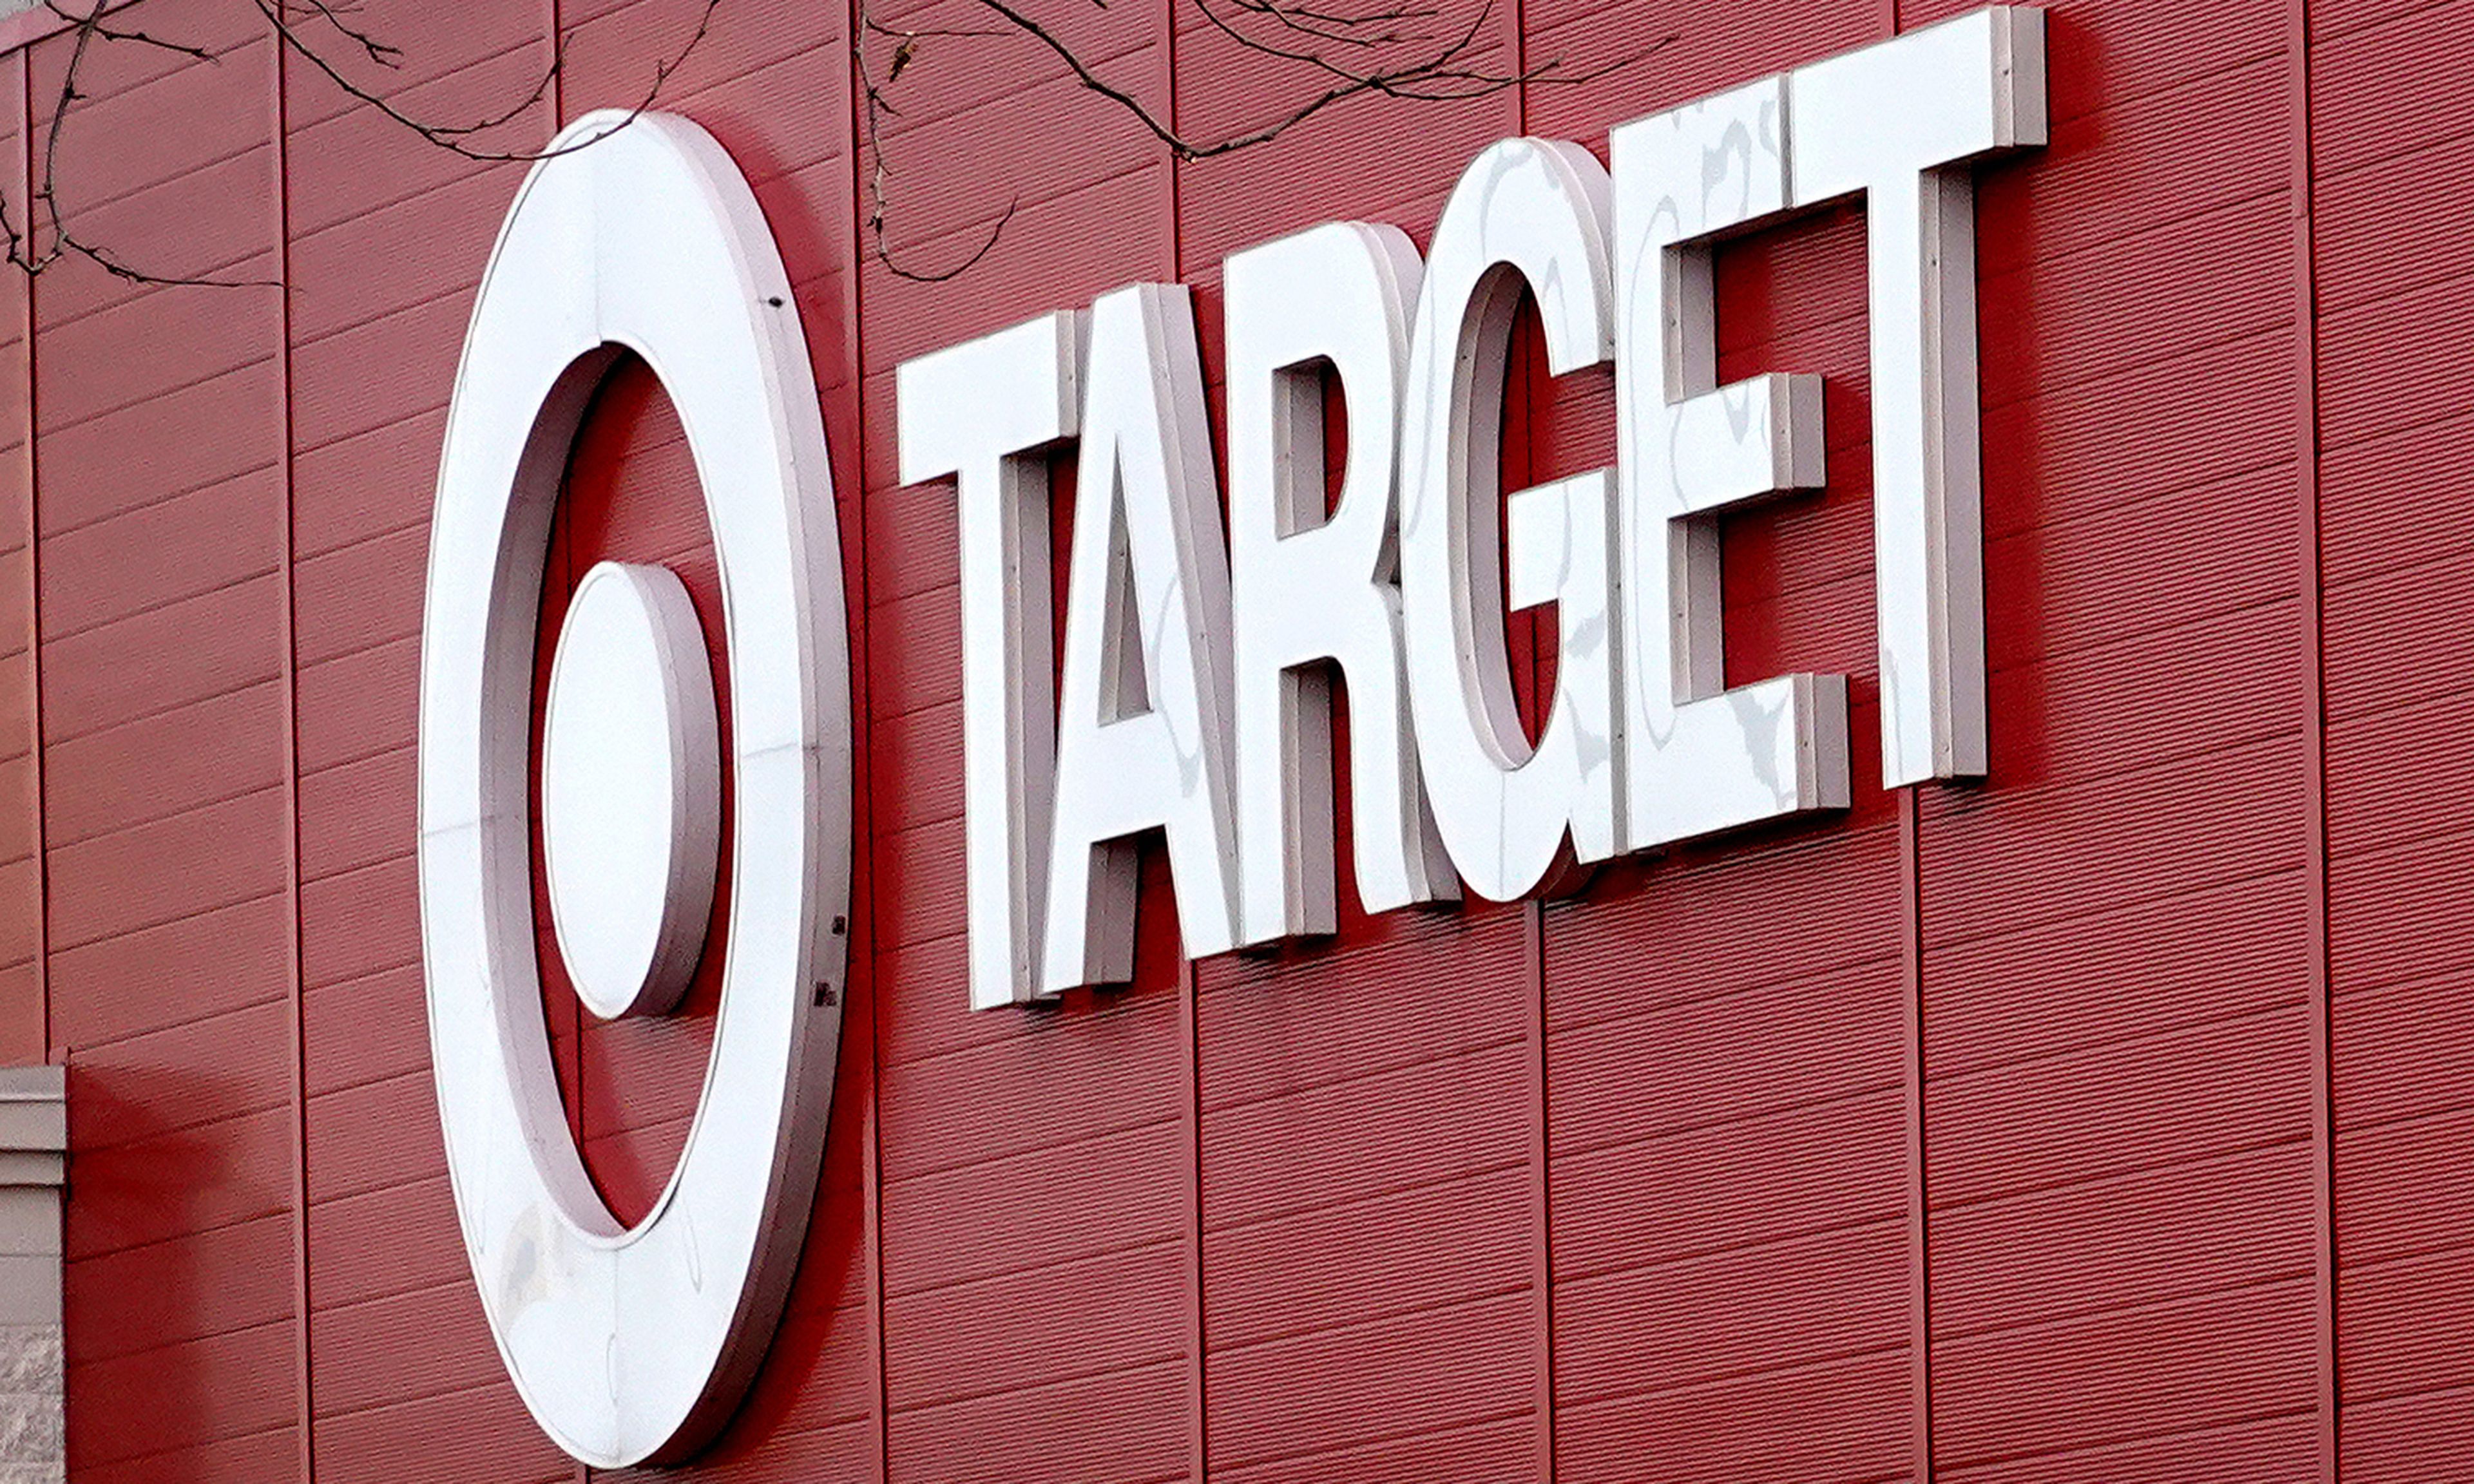 Target released an open-source tool to combat web-skimming earlier this month. Pictured: A sign hangs outside of a Target store on Jan. 13, 2021, in Chicago. (Photo by Scott Olson/Getty Images)